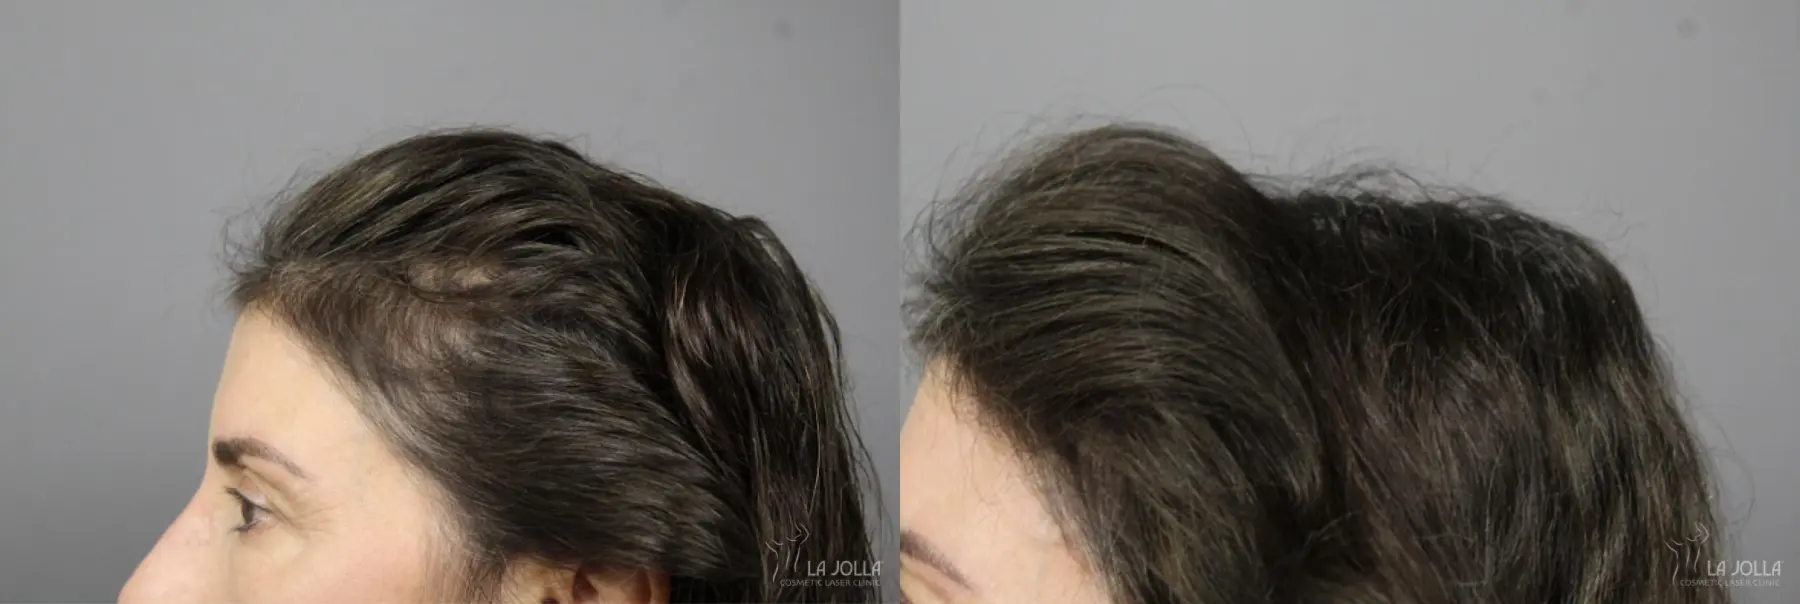 PRP (Platelet-Rich Plasma): Patient 1 - Before and After  